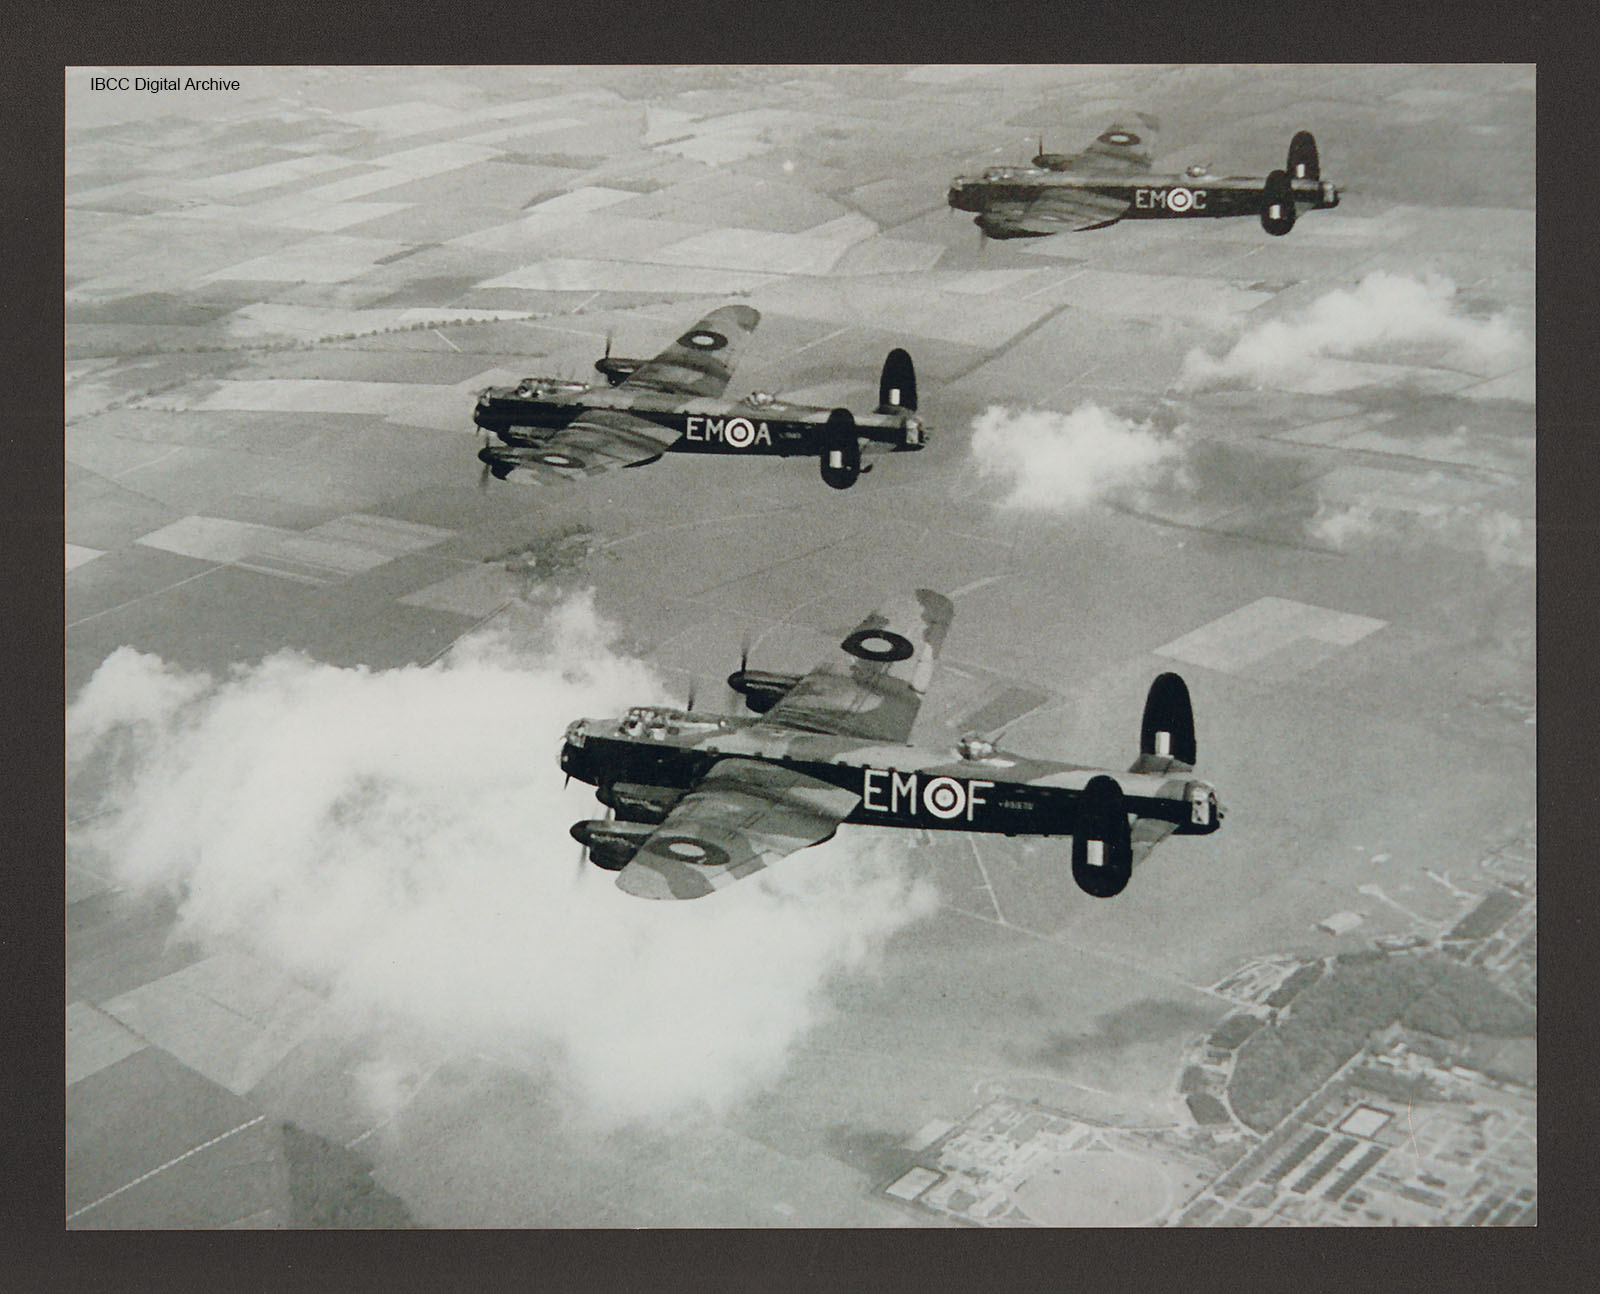 lancasters-in-flight-over-raf-college-cranwell-ibcc-digital-archive